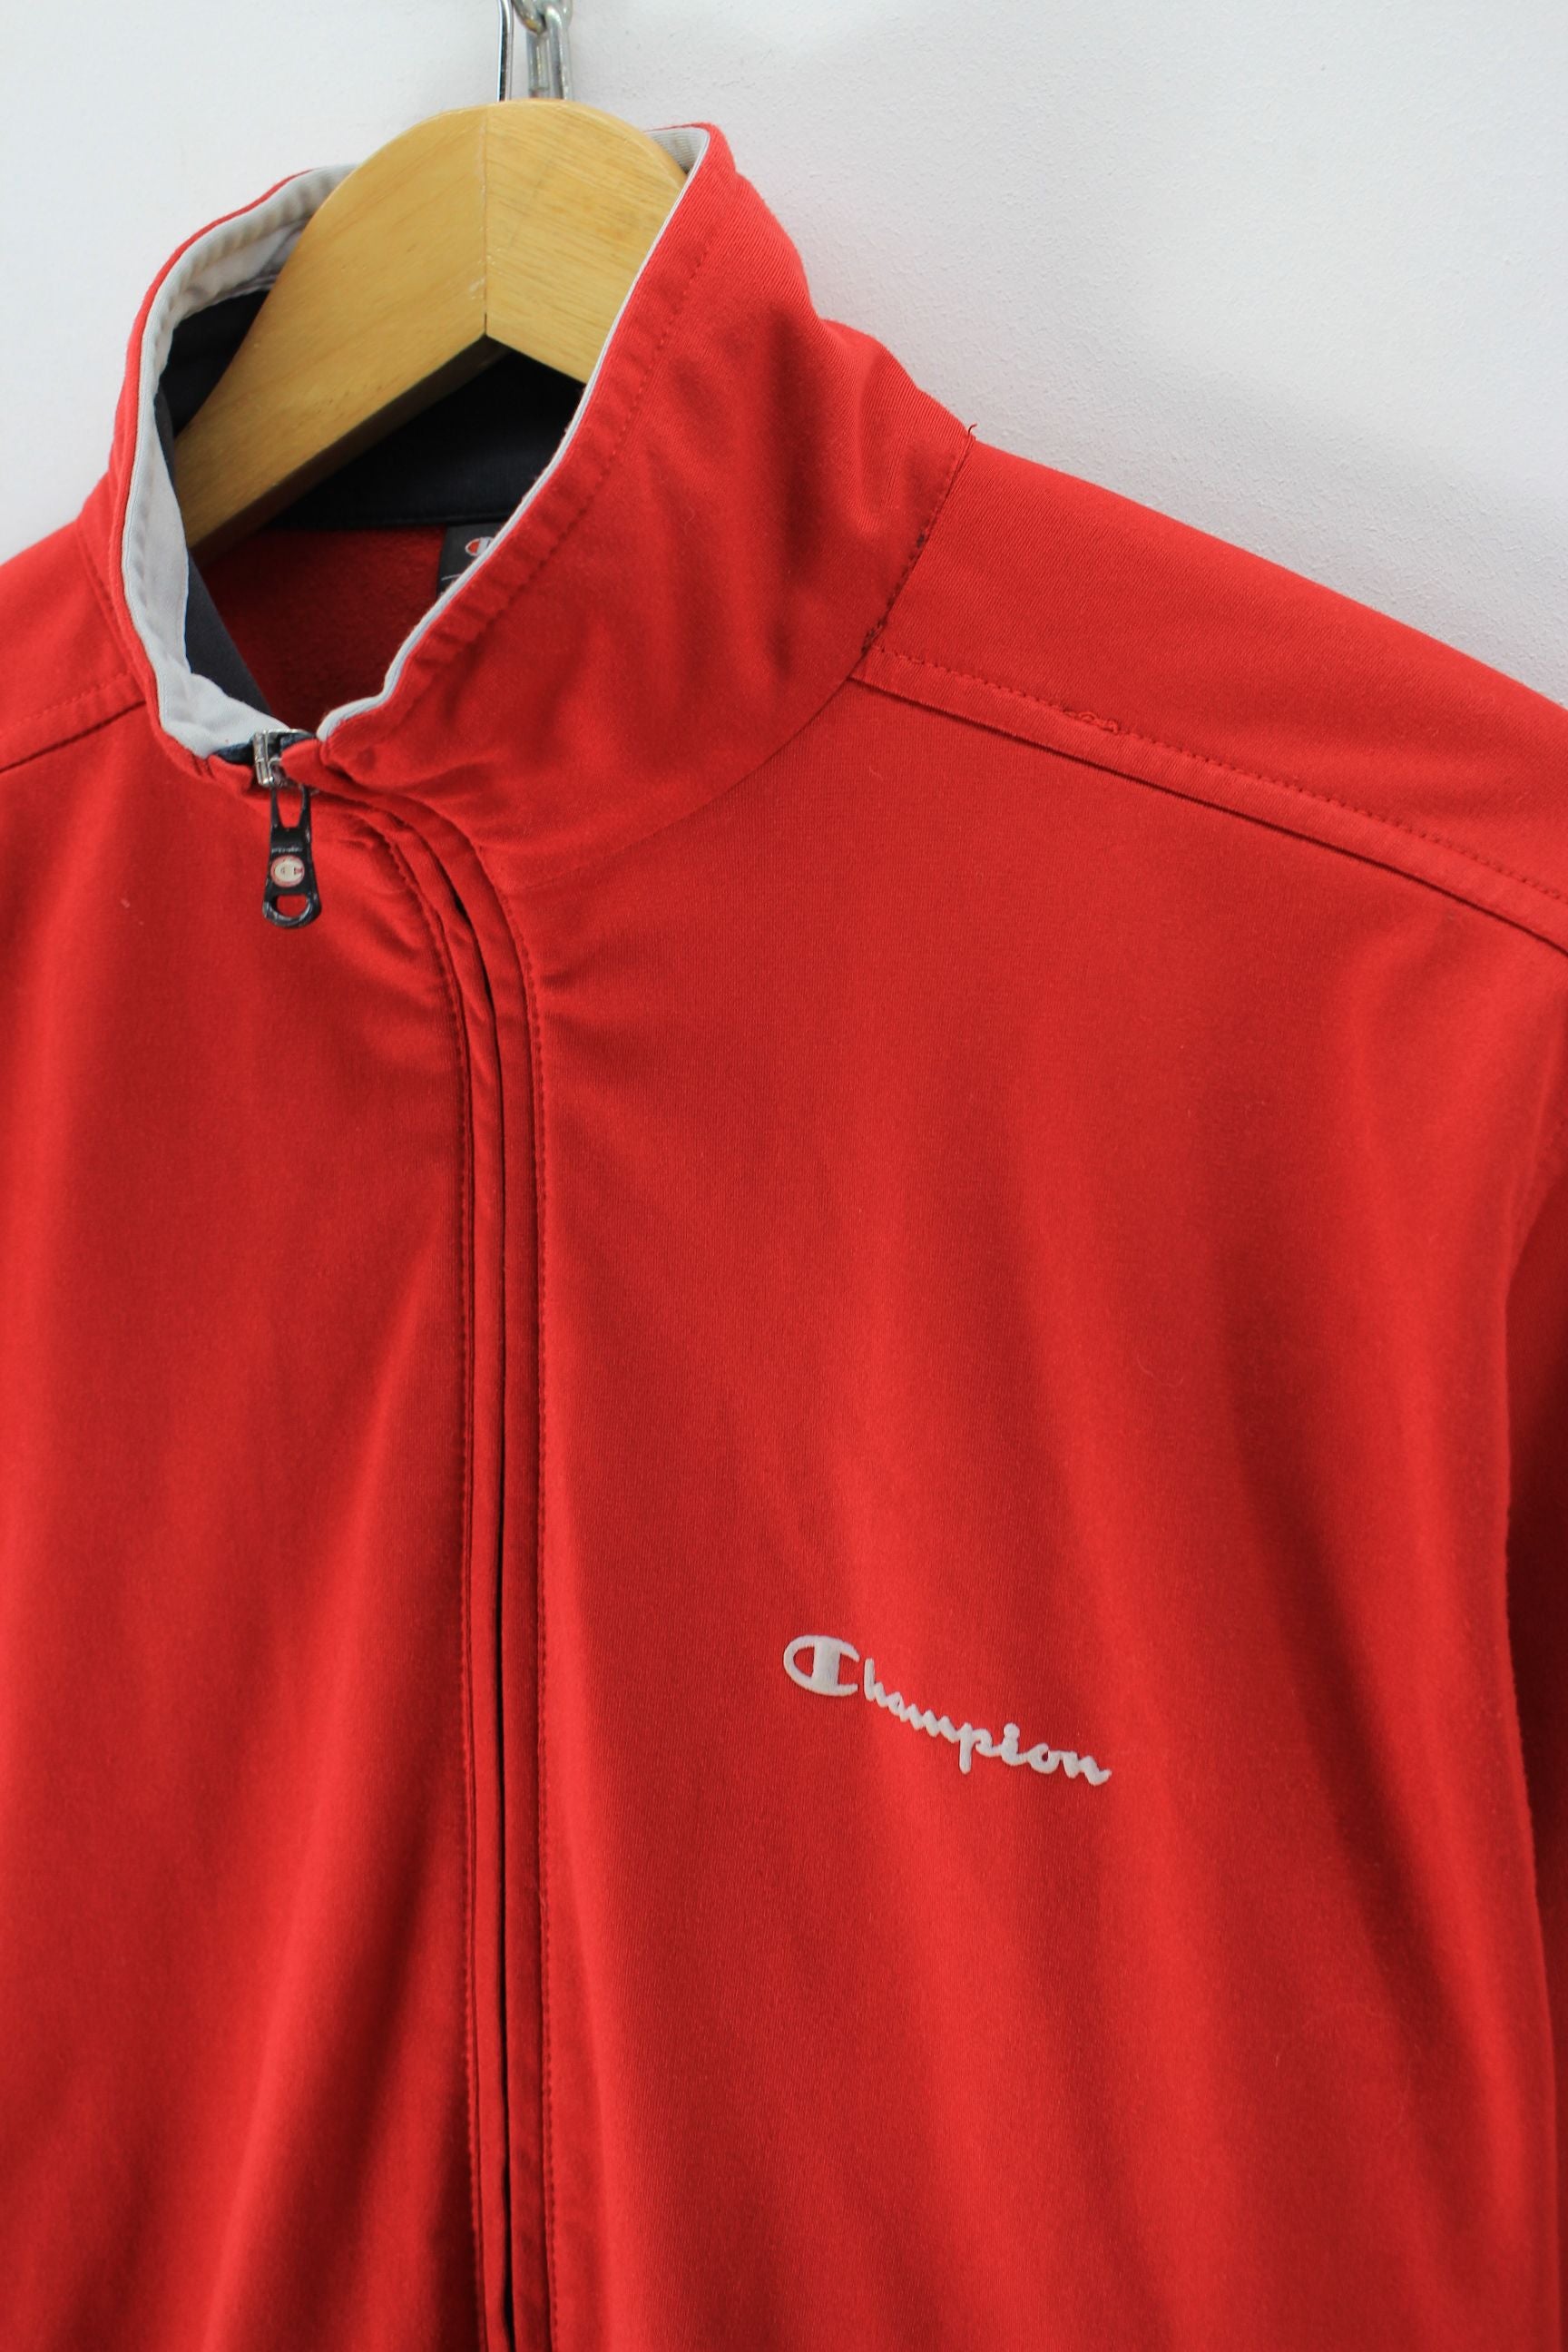 red champion jackets